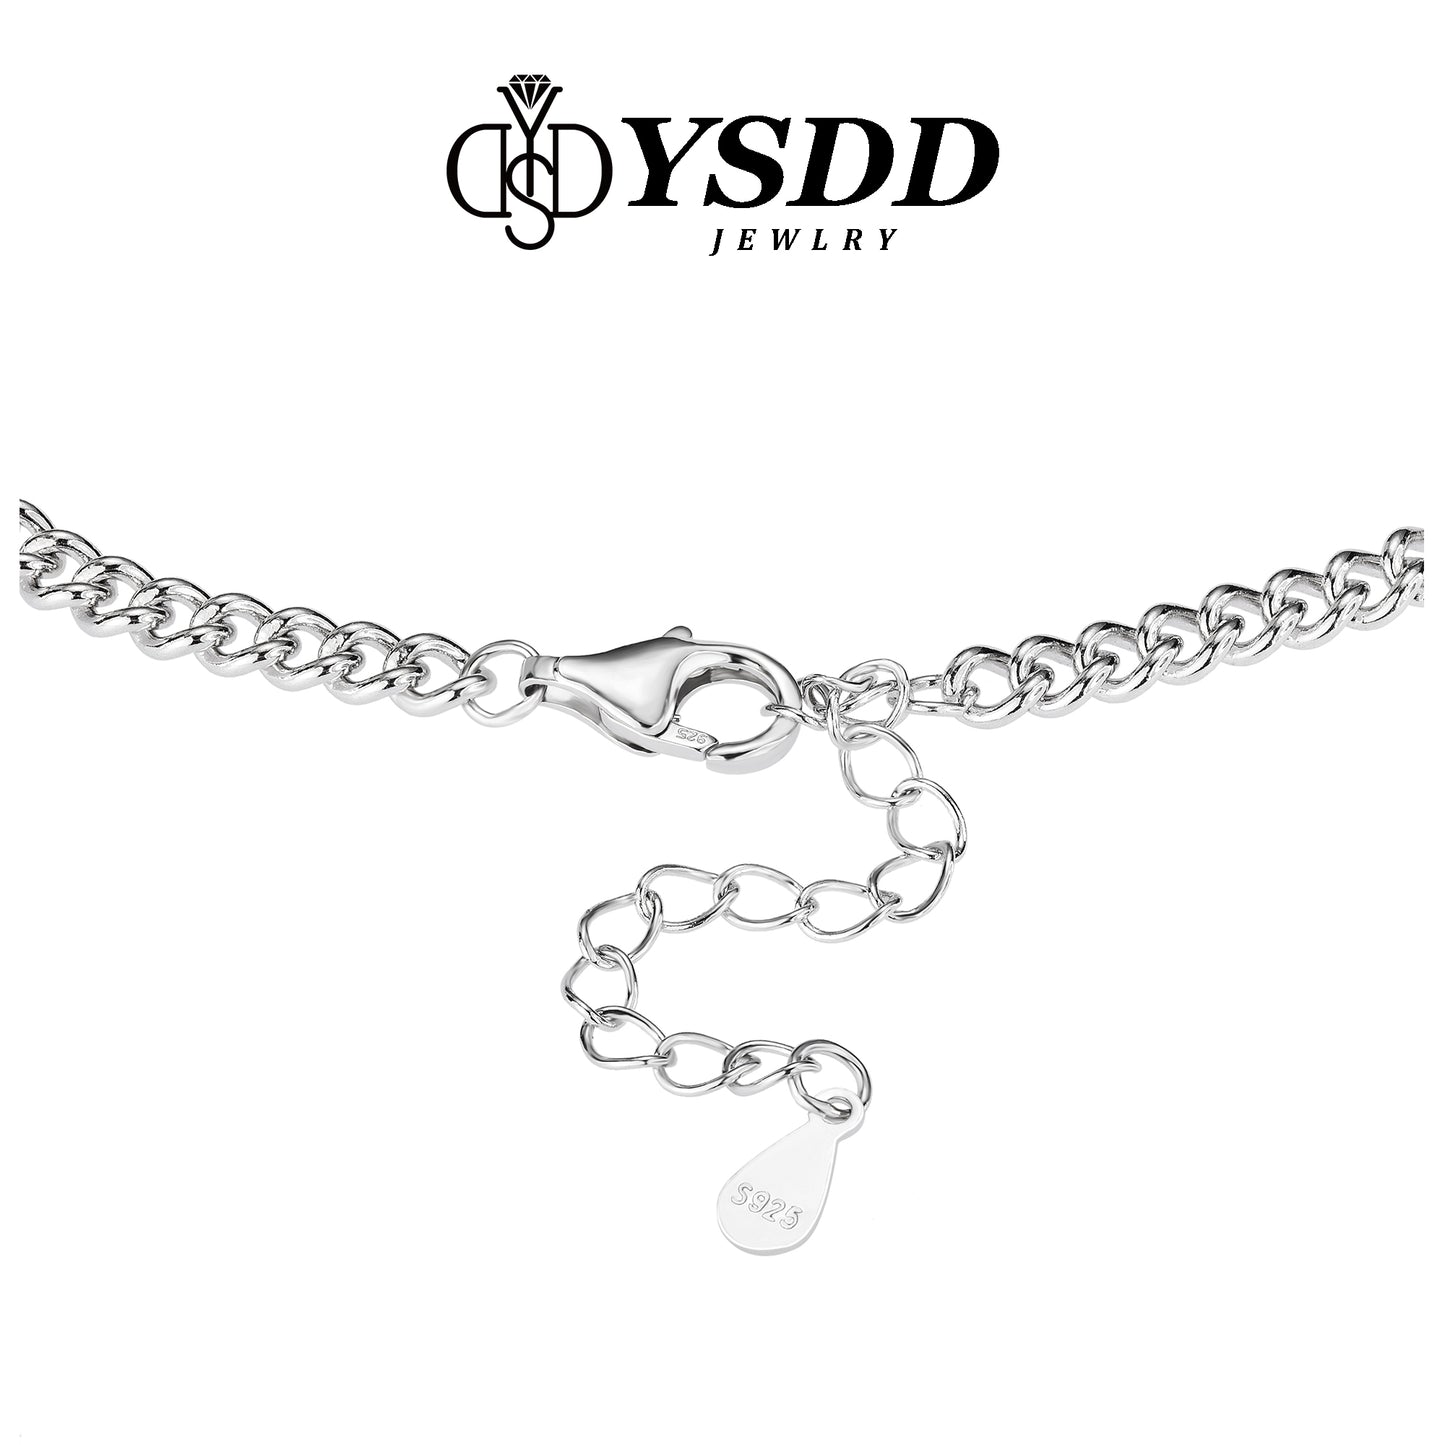 【#174 New Arrival】2CT Princess Cut Solitaire Moissanite Chain Bracelet in 925 Sterling Silver